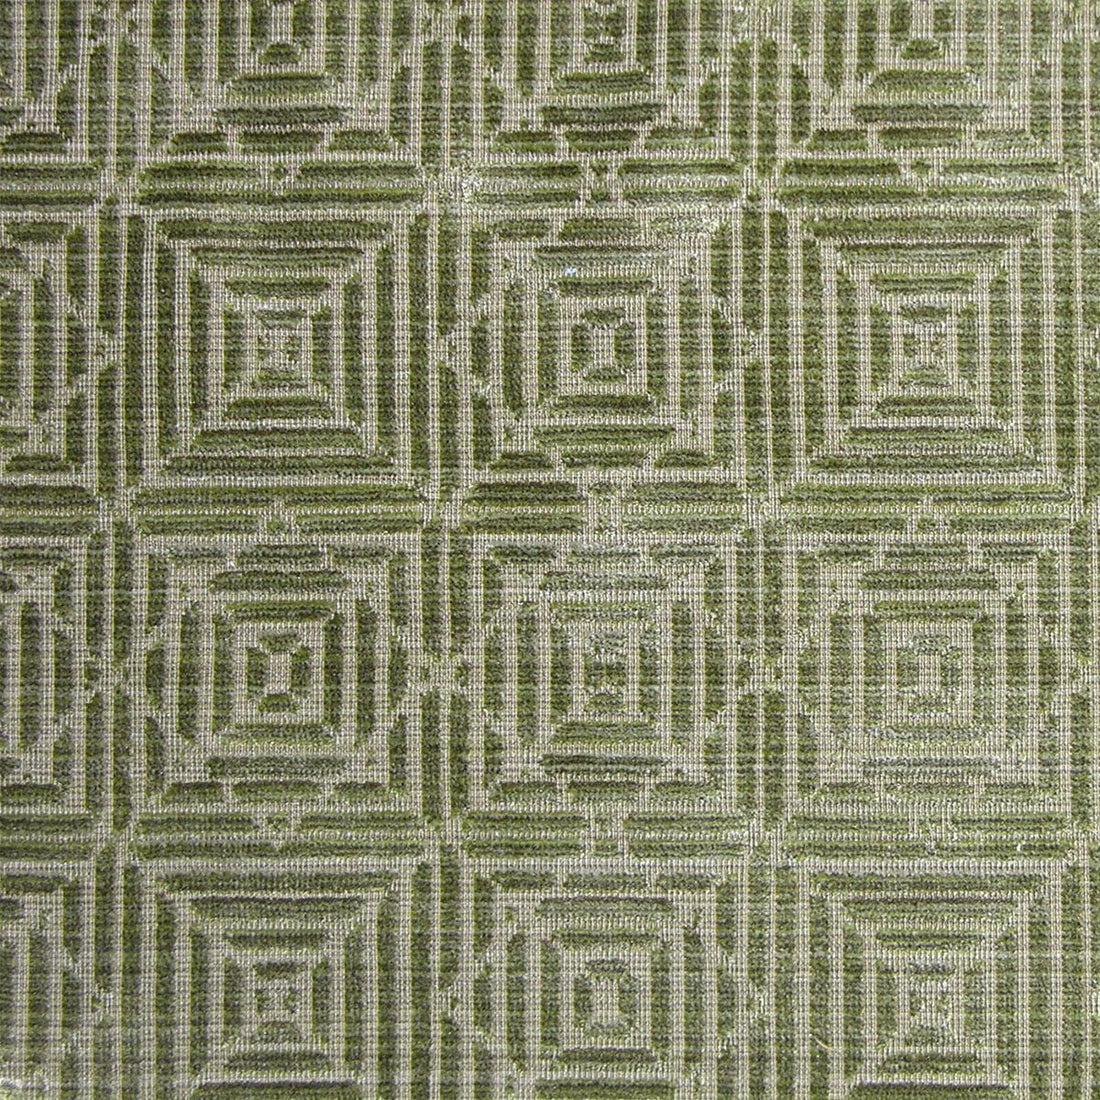 Scherzo fabric in leaf color - pattern number GG 00041406 - by Scalamandre in the Old World Weavers collection